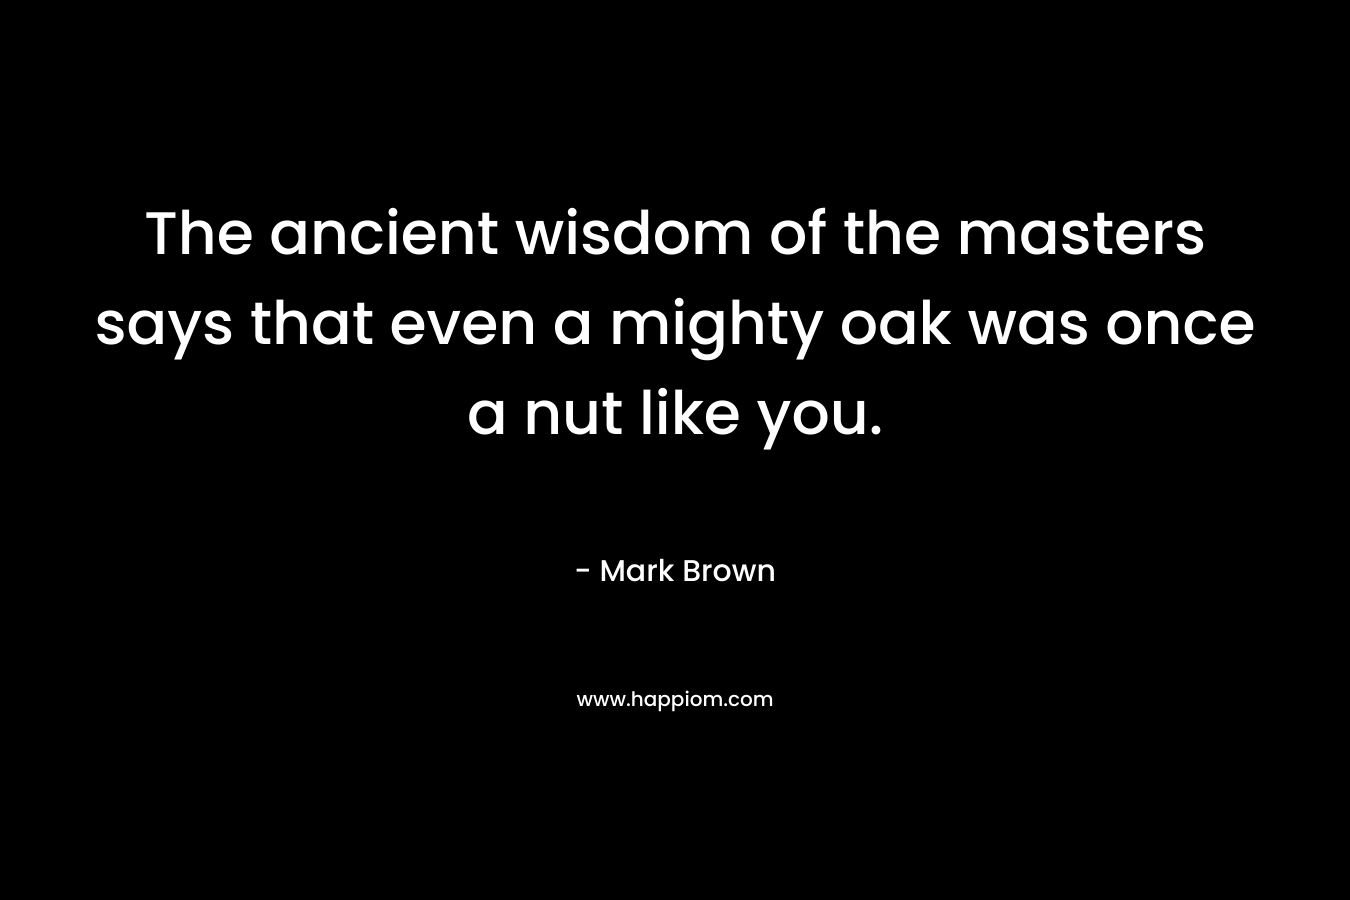 The ancient wisdom of the masters says that even a mighty oak was once a nut like you. – Mark Brown